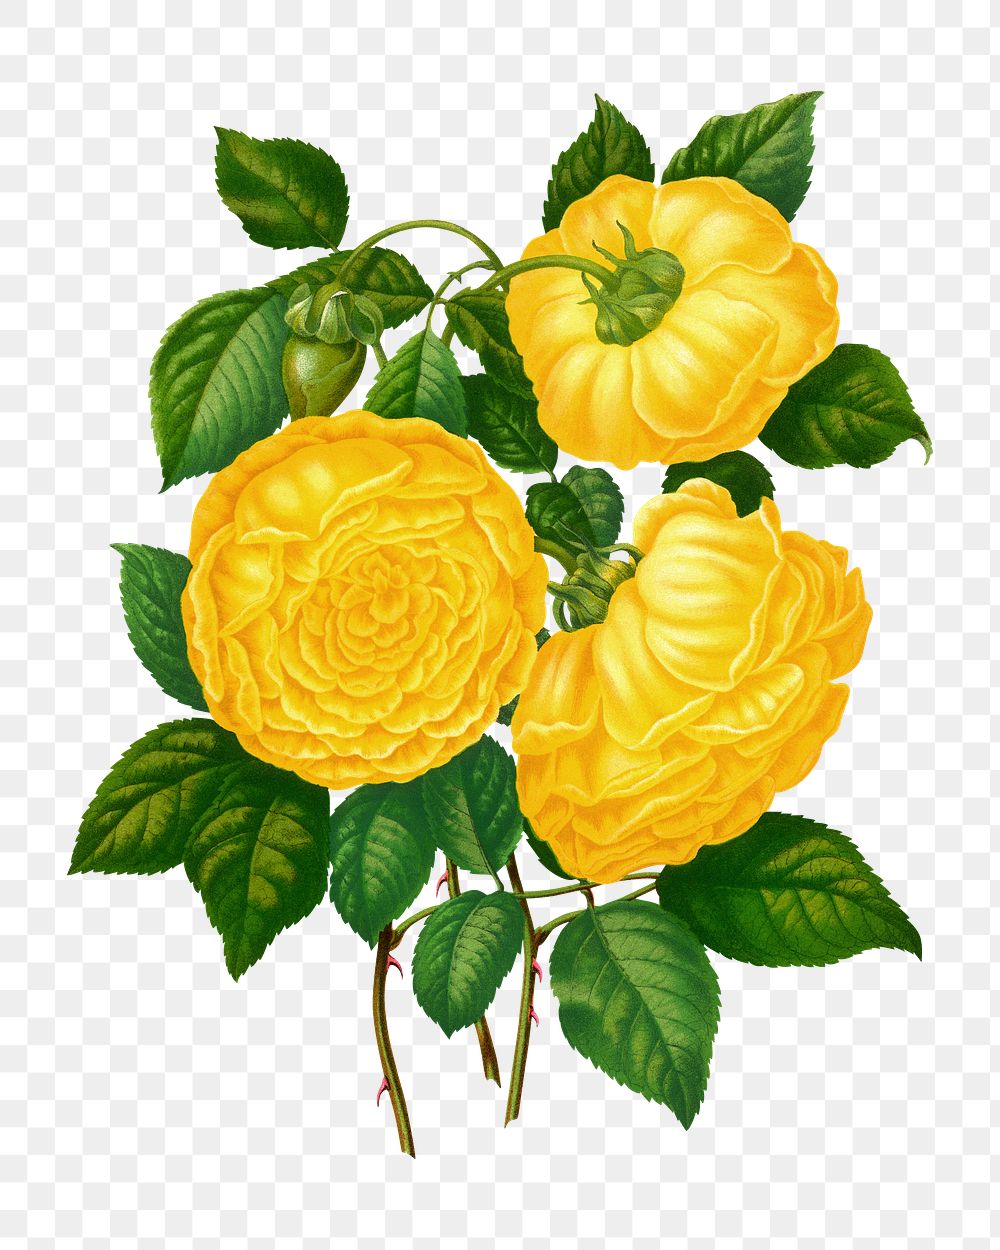 PNG vintage yellow roses illustration, transparent background. Remixed from our own original 1879 edition of Nederlandsche…